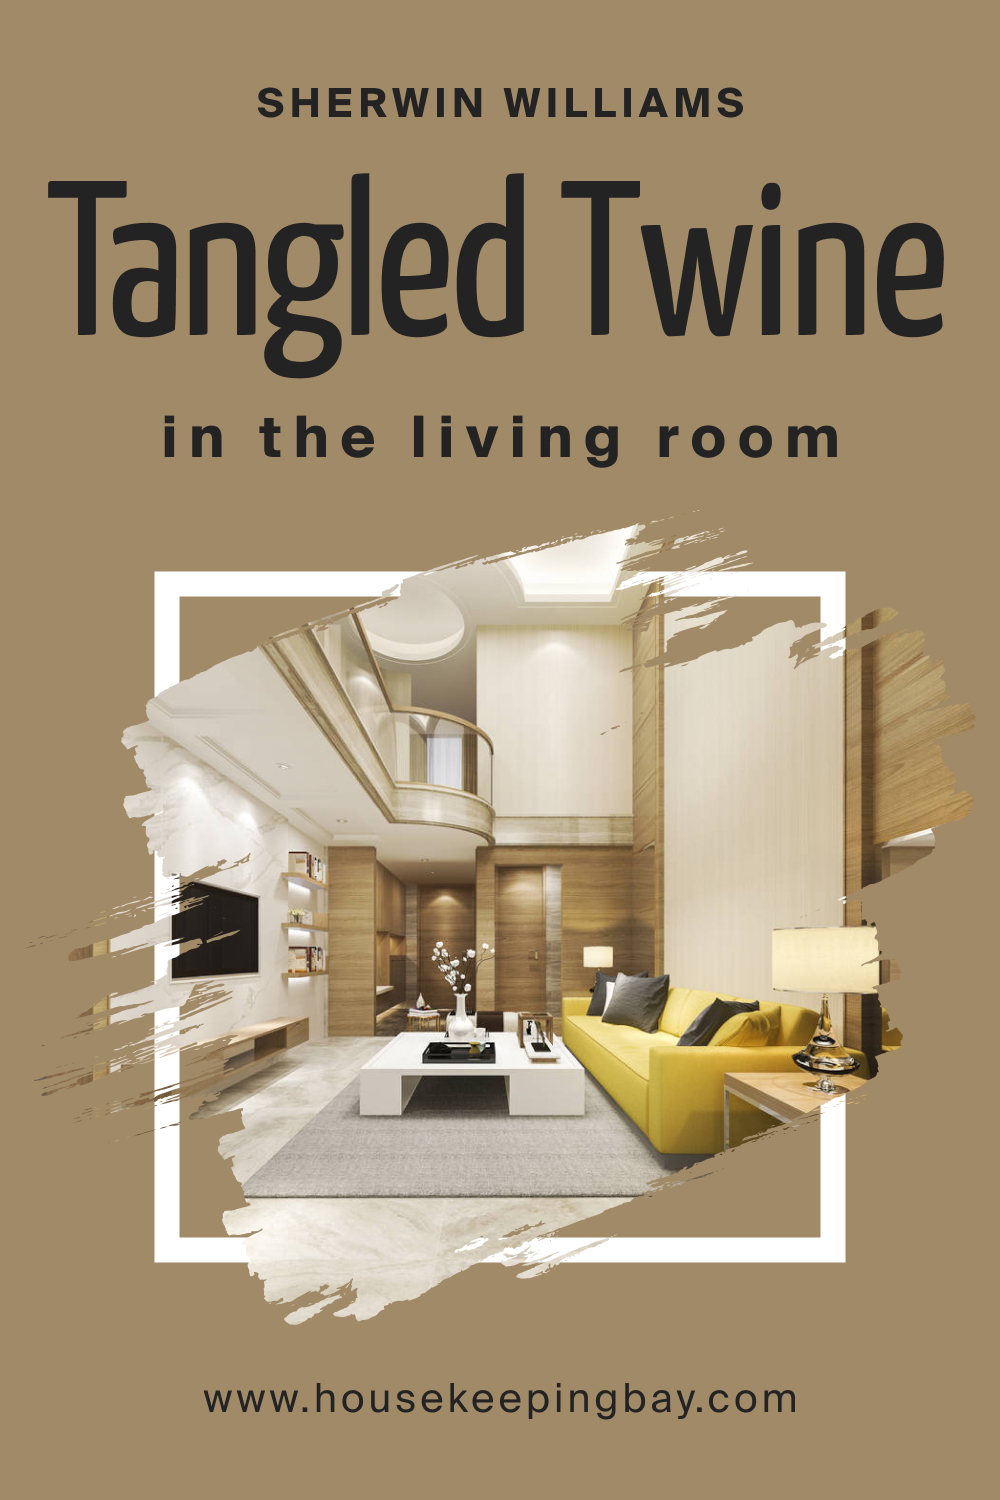 Sherwin Williams. SW 9538 Tangled Twine In the Living Room